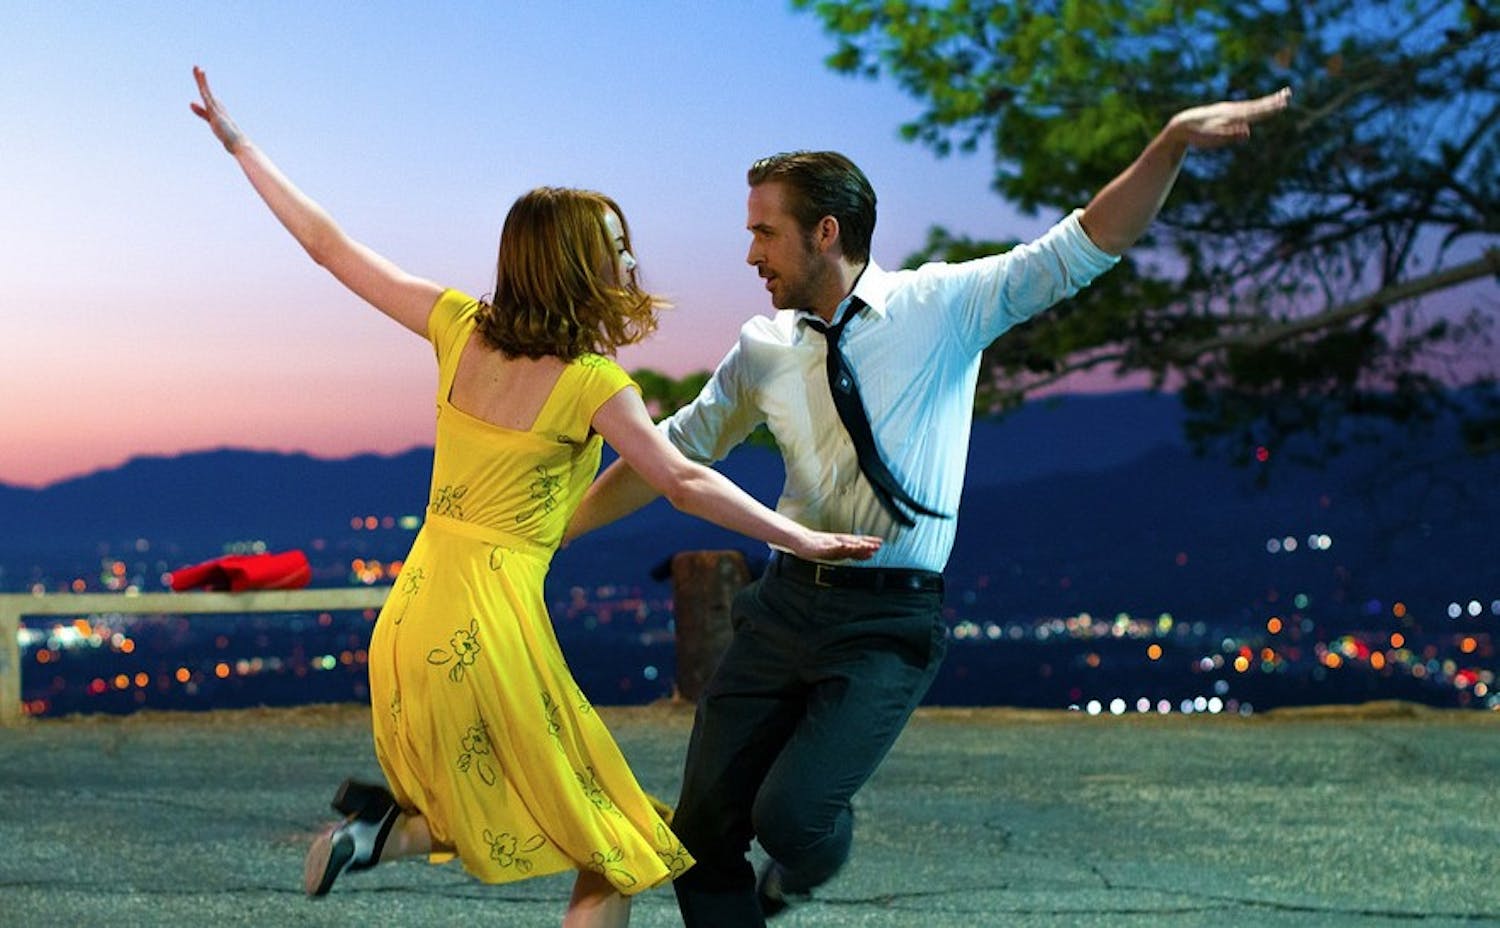 Damien Chazelle delivers a musical that is&nbsp;still grounded in realism in his film "La La Land."